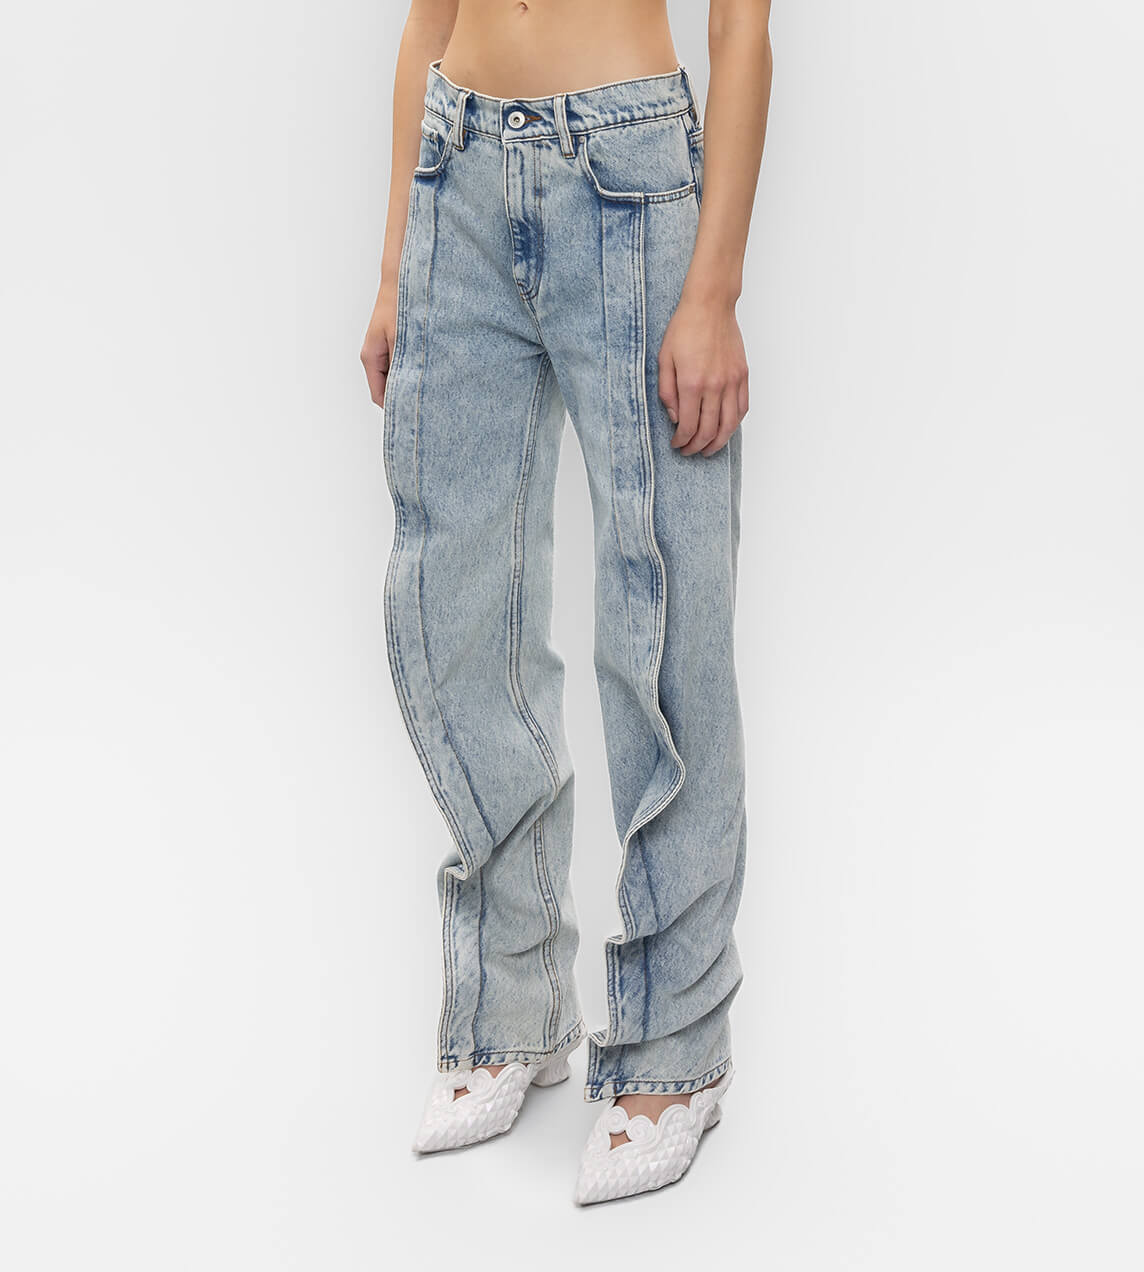 Y/Project - Slim Banana Jeans Ice Blue